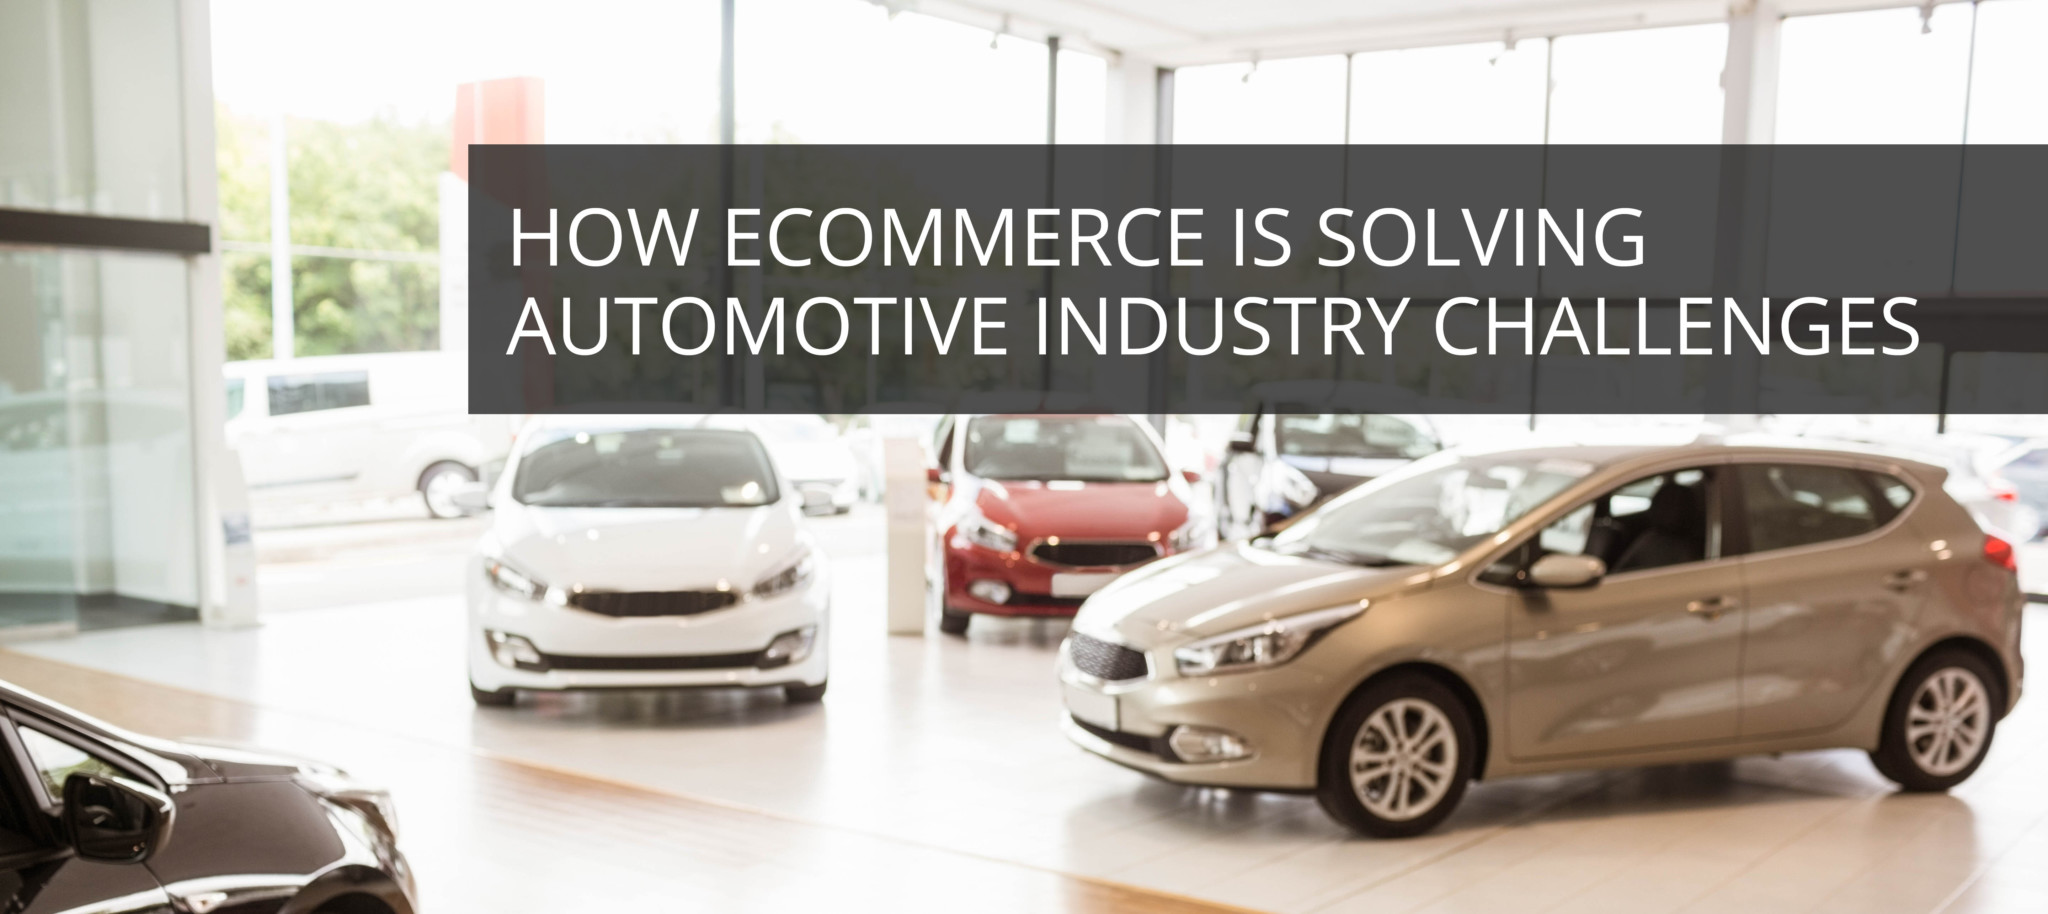 How eCommerce Is Solving Automotive Industry Challenges